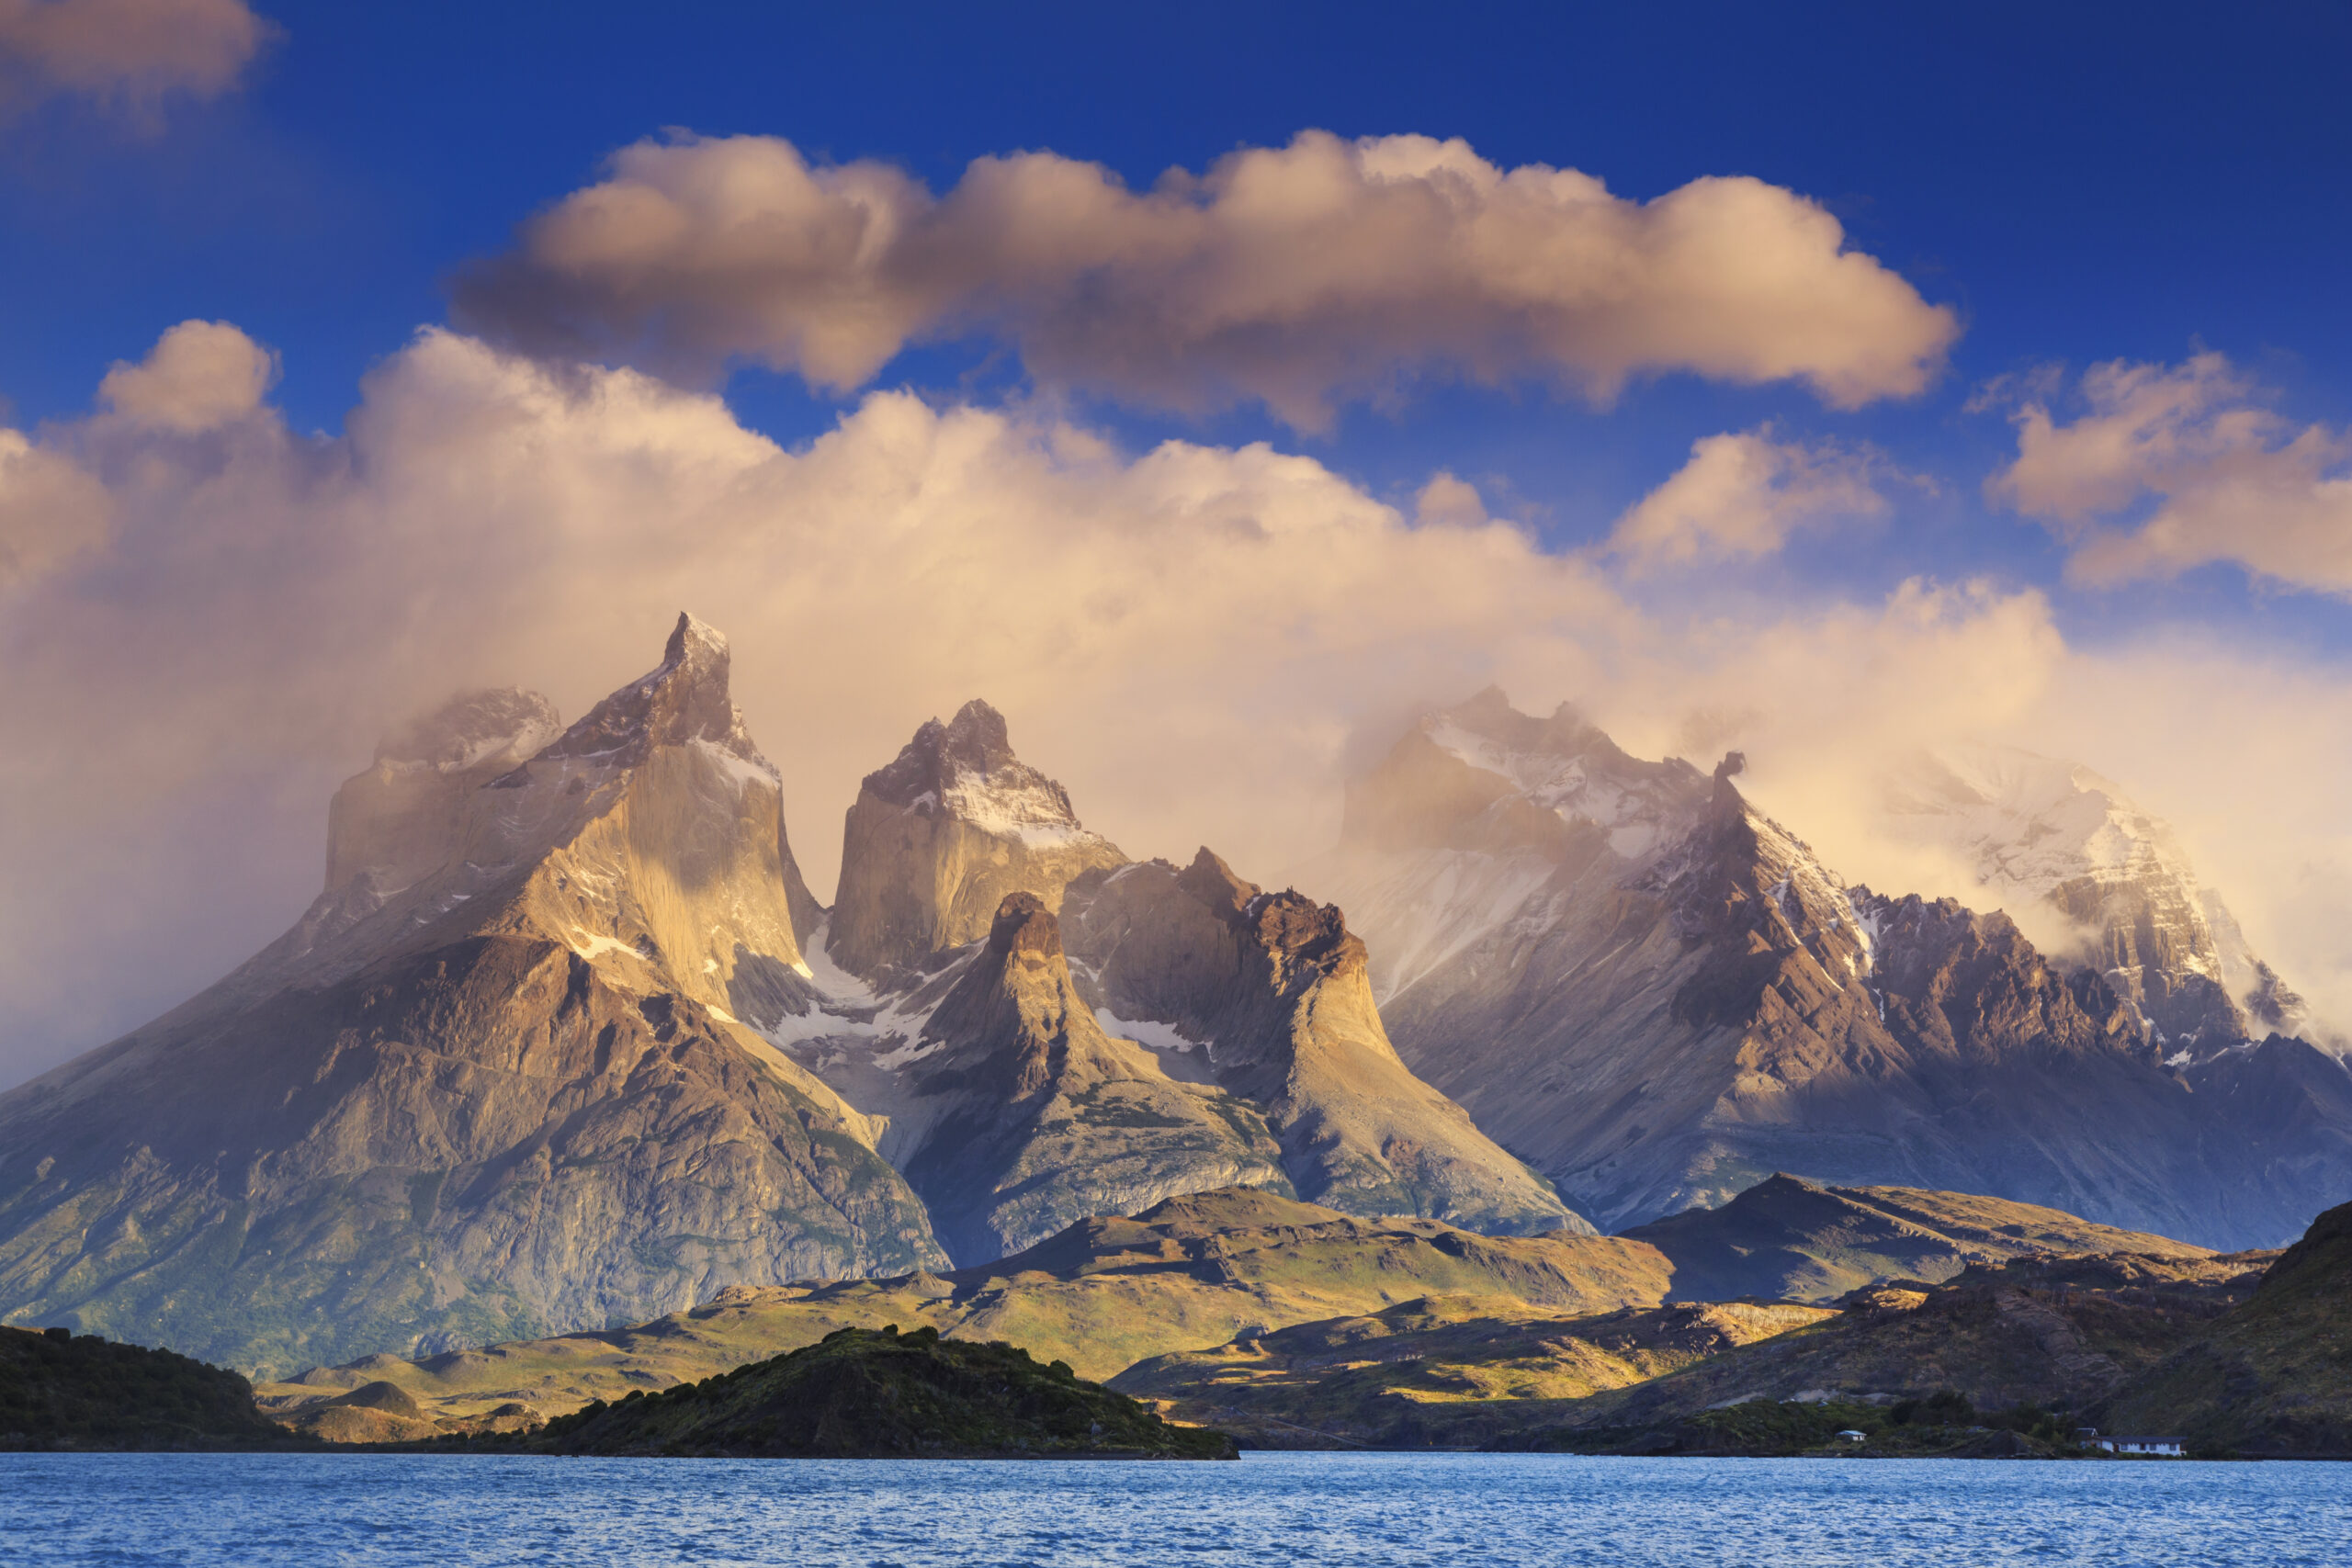 Patagonian Frontiers